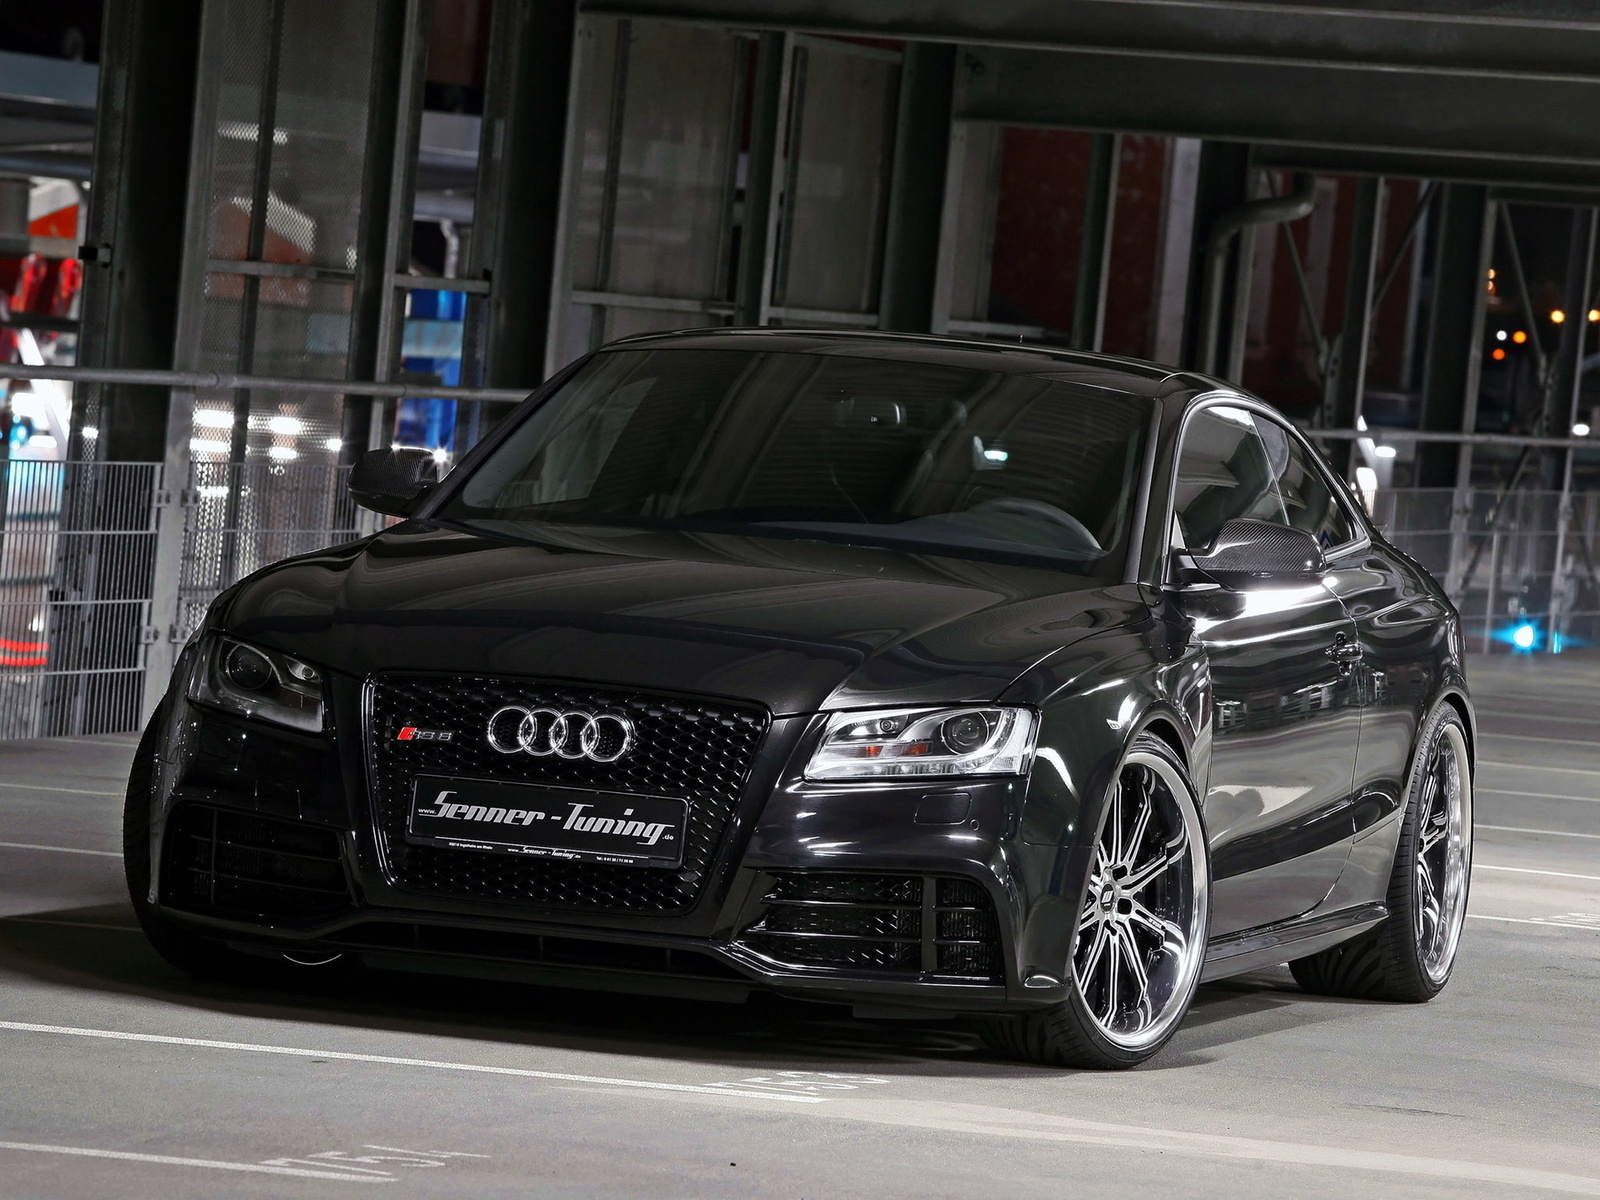 Wallpaper Audi Rs5 Black Tuning Cars Large On The